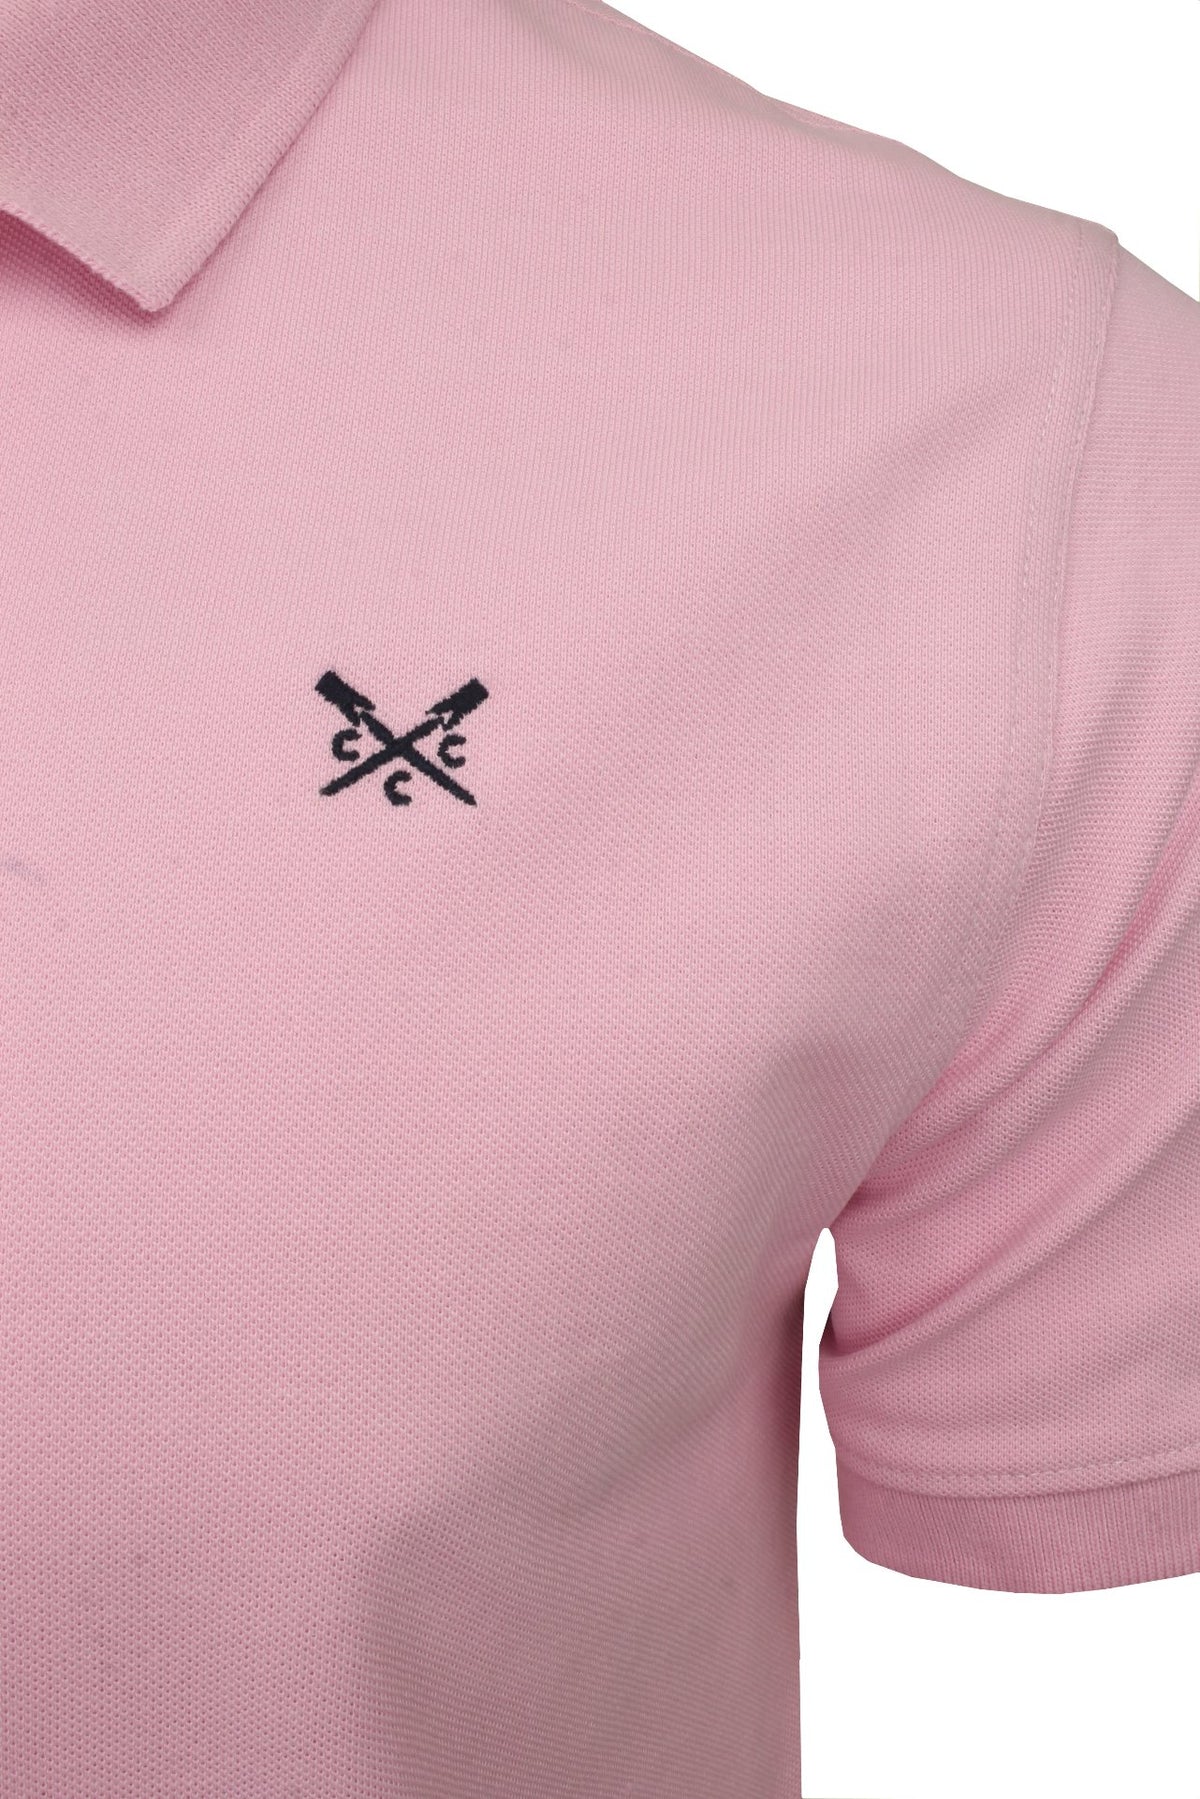 Crew Clothing Mens Pique Polo Shirt 'Classic Pique Polo' - Short Sleeved, 02, Mke002, Classic Pink